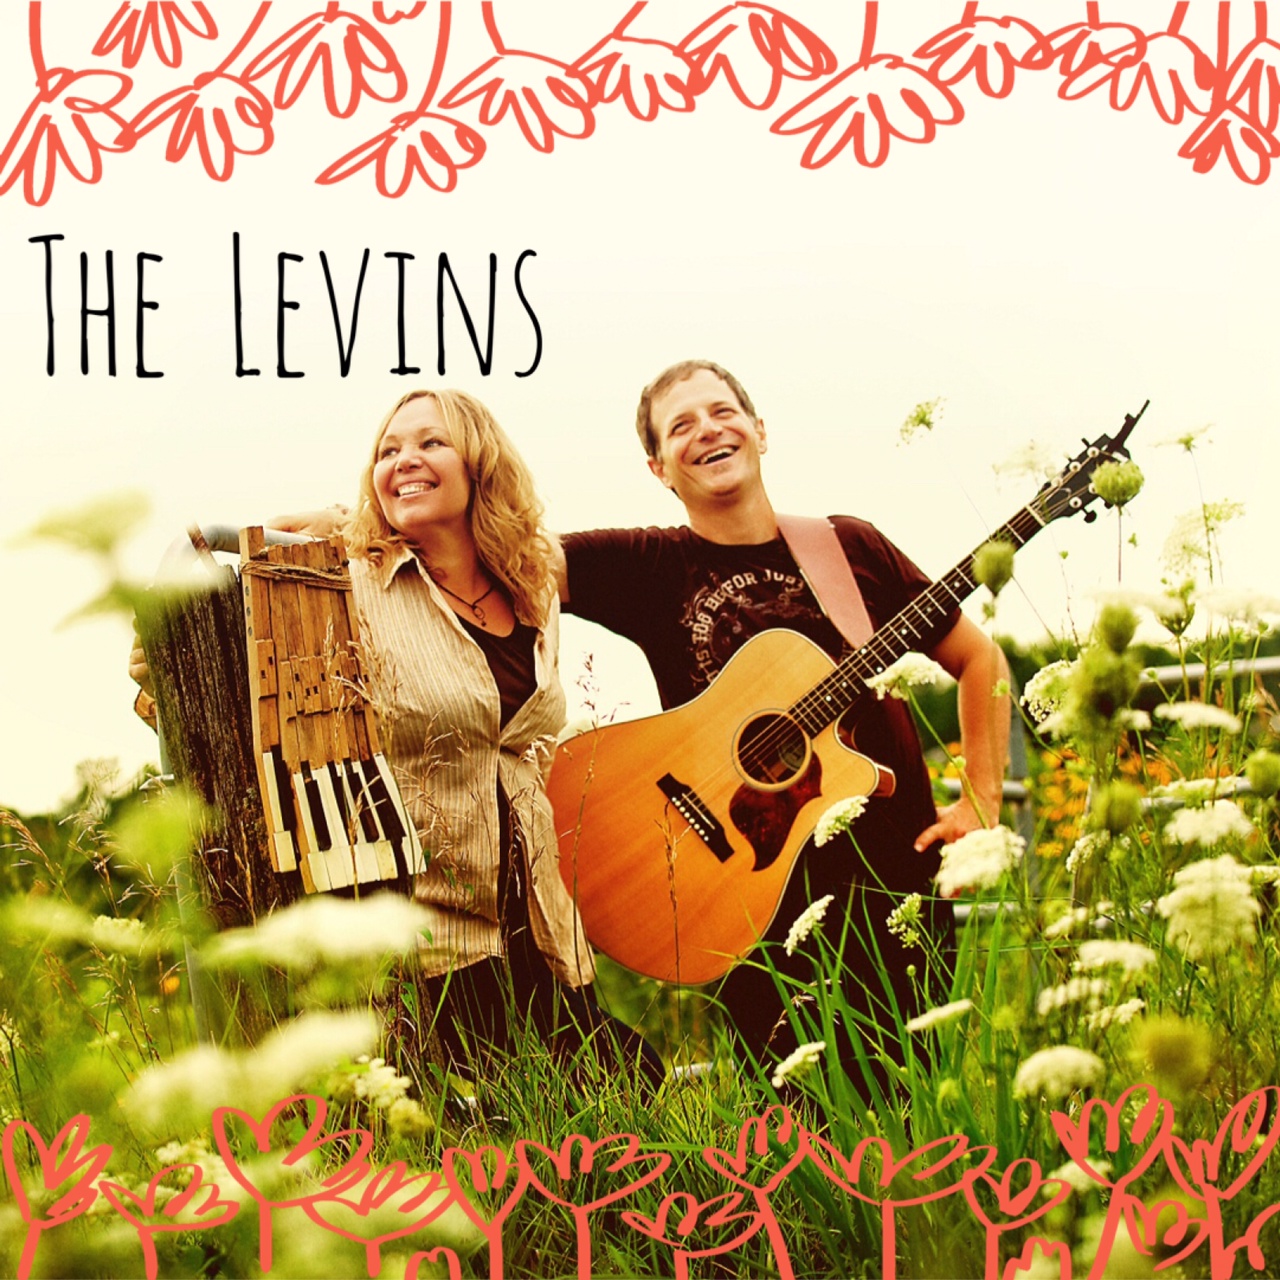 The Levins